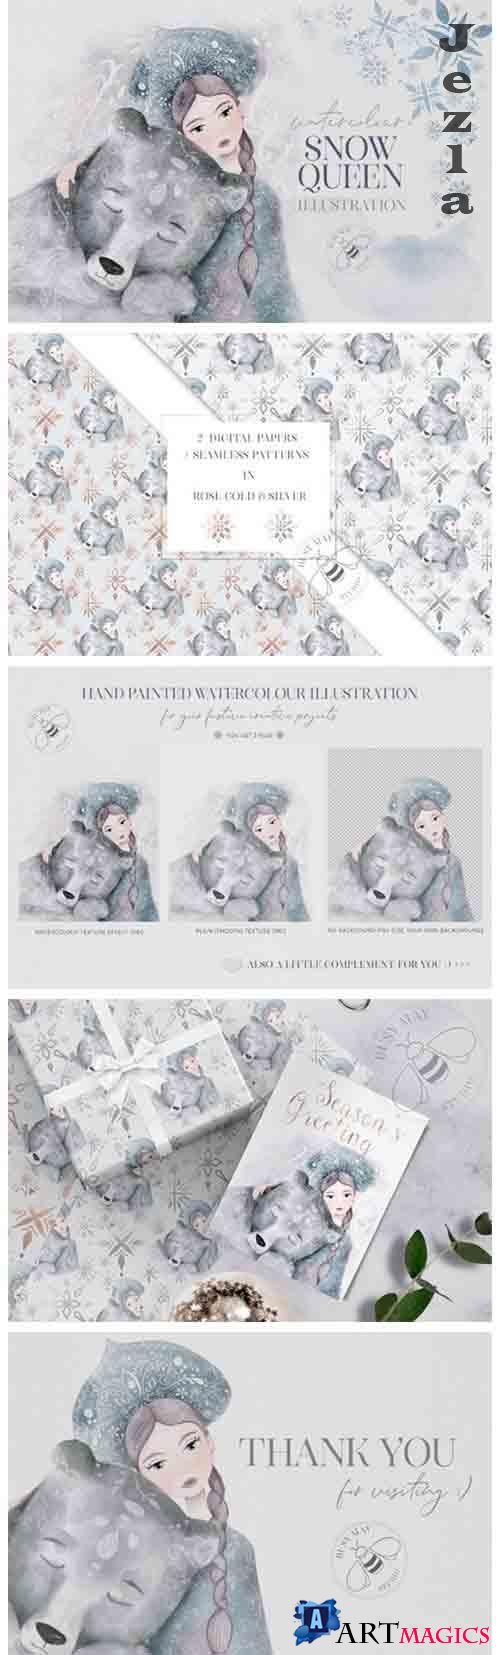 Watercolor Winter Christmas Snow Queen Illustration Bear PNG - 1057325